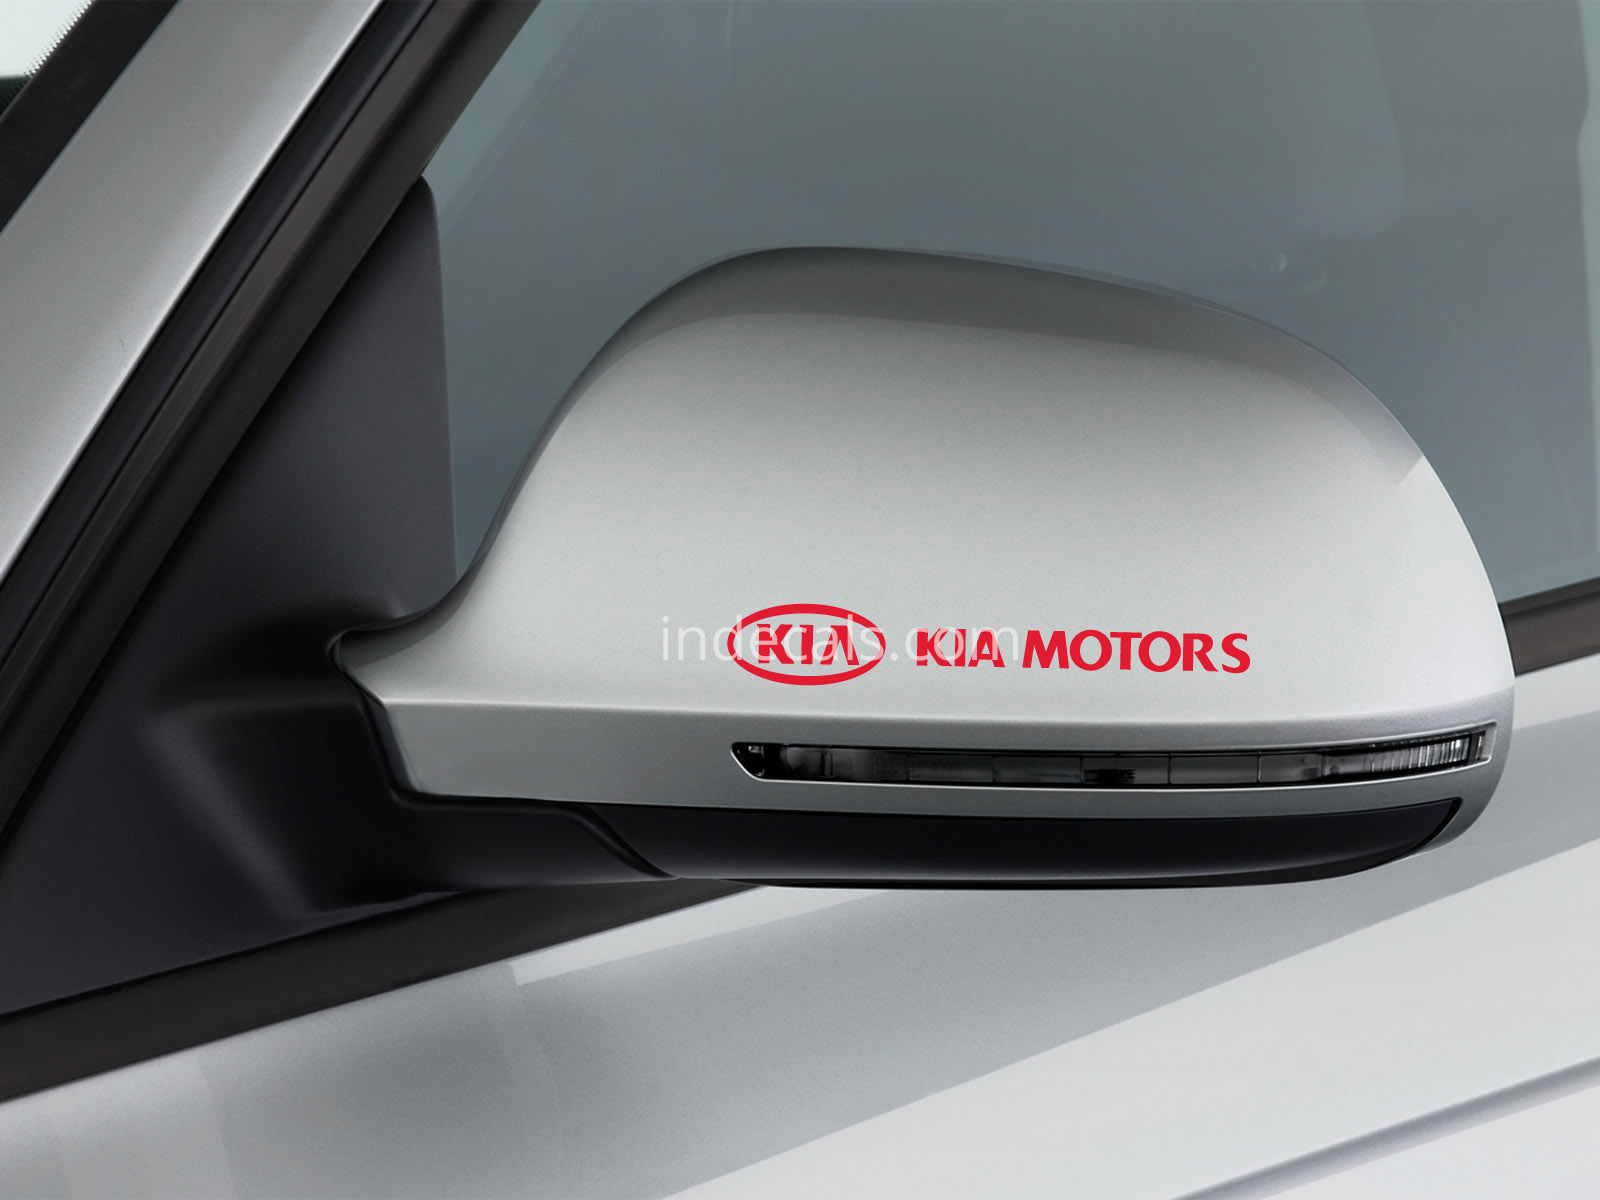 3 x Kia Stickers for Mirrors - Red